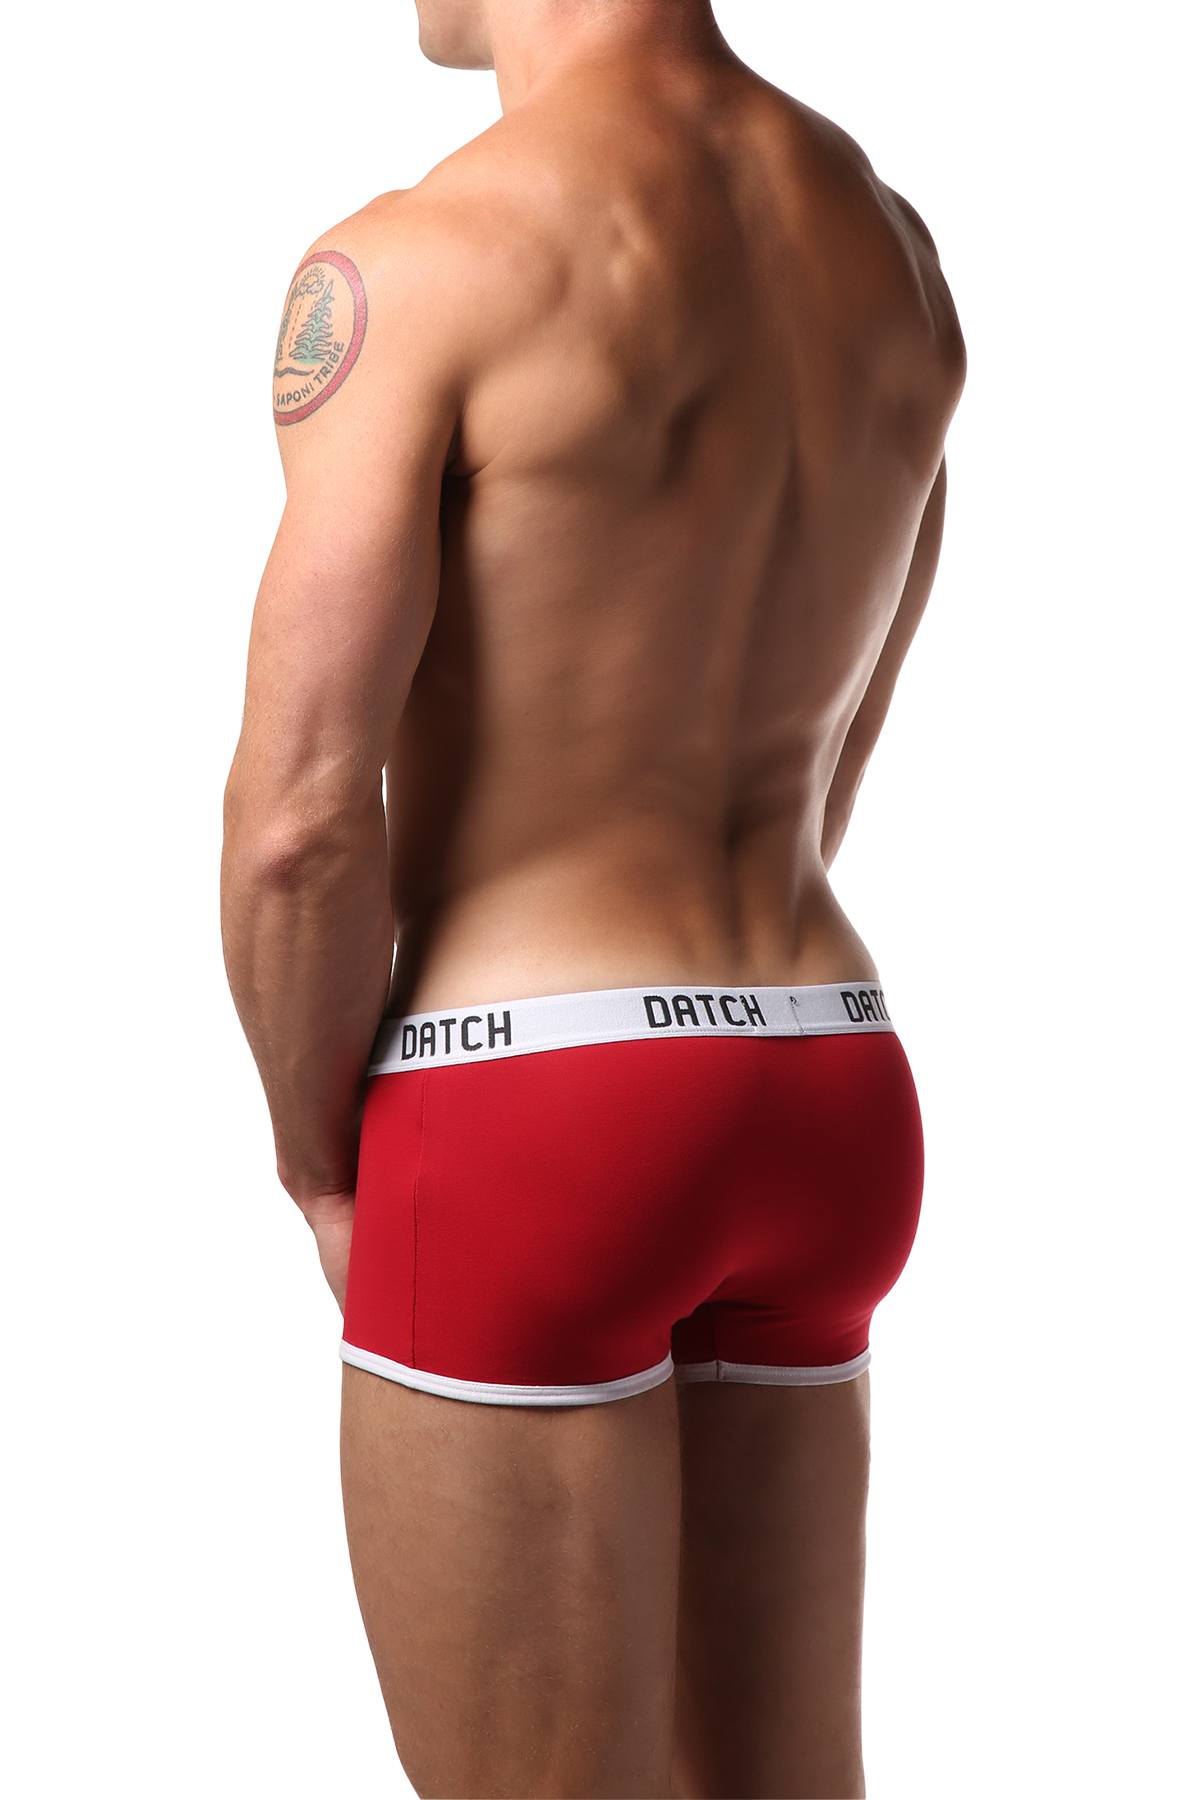 Datch Red Contrast Boxer Trunk